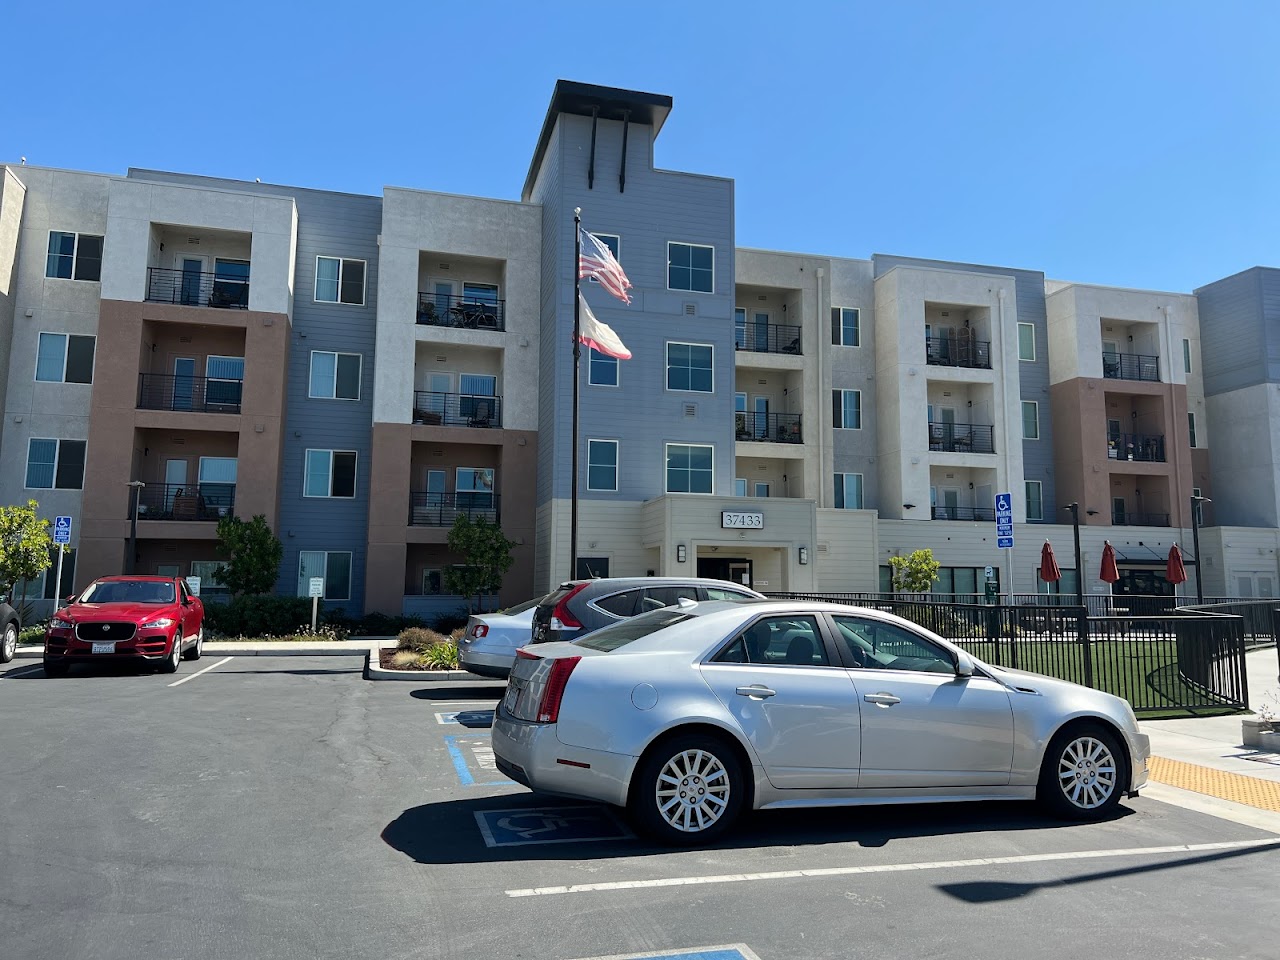 Photo of NEWARK STATION SENIORS. Affordable housing located at 37433 WILLOW ST NEWARK, CA 94560